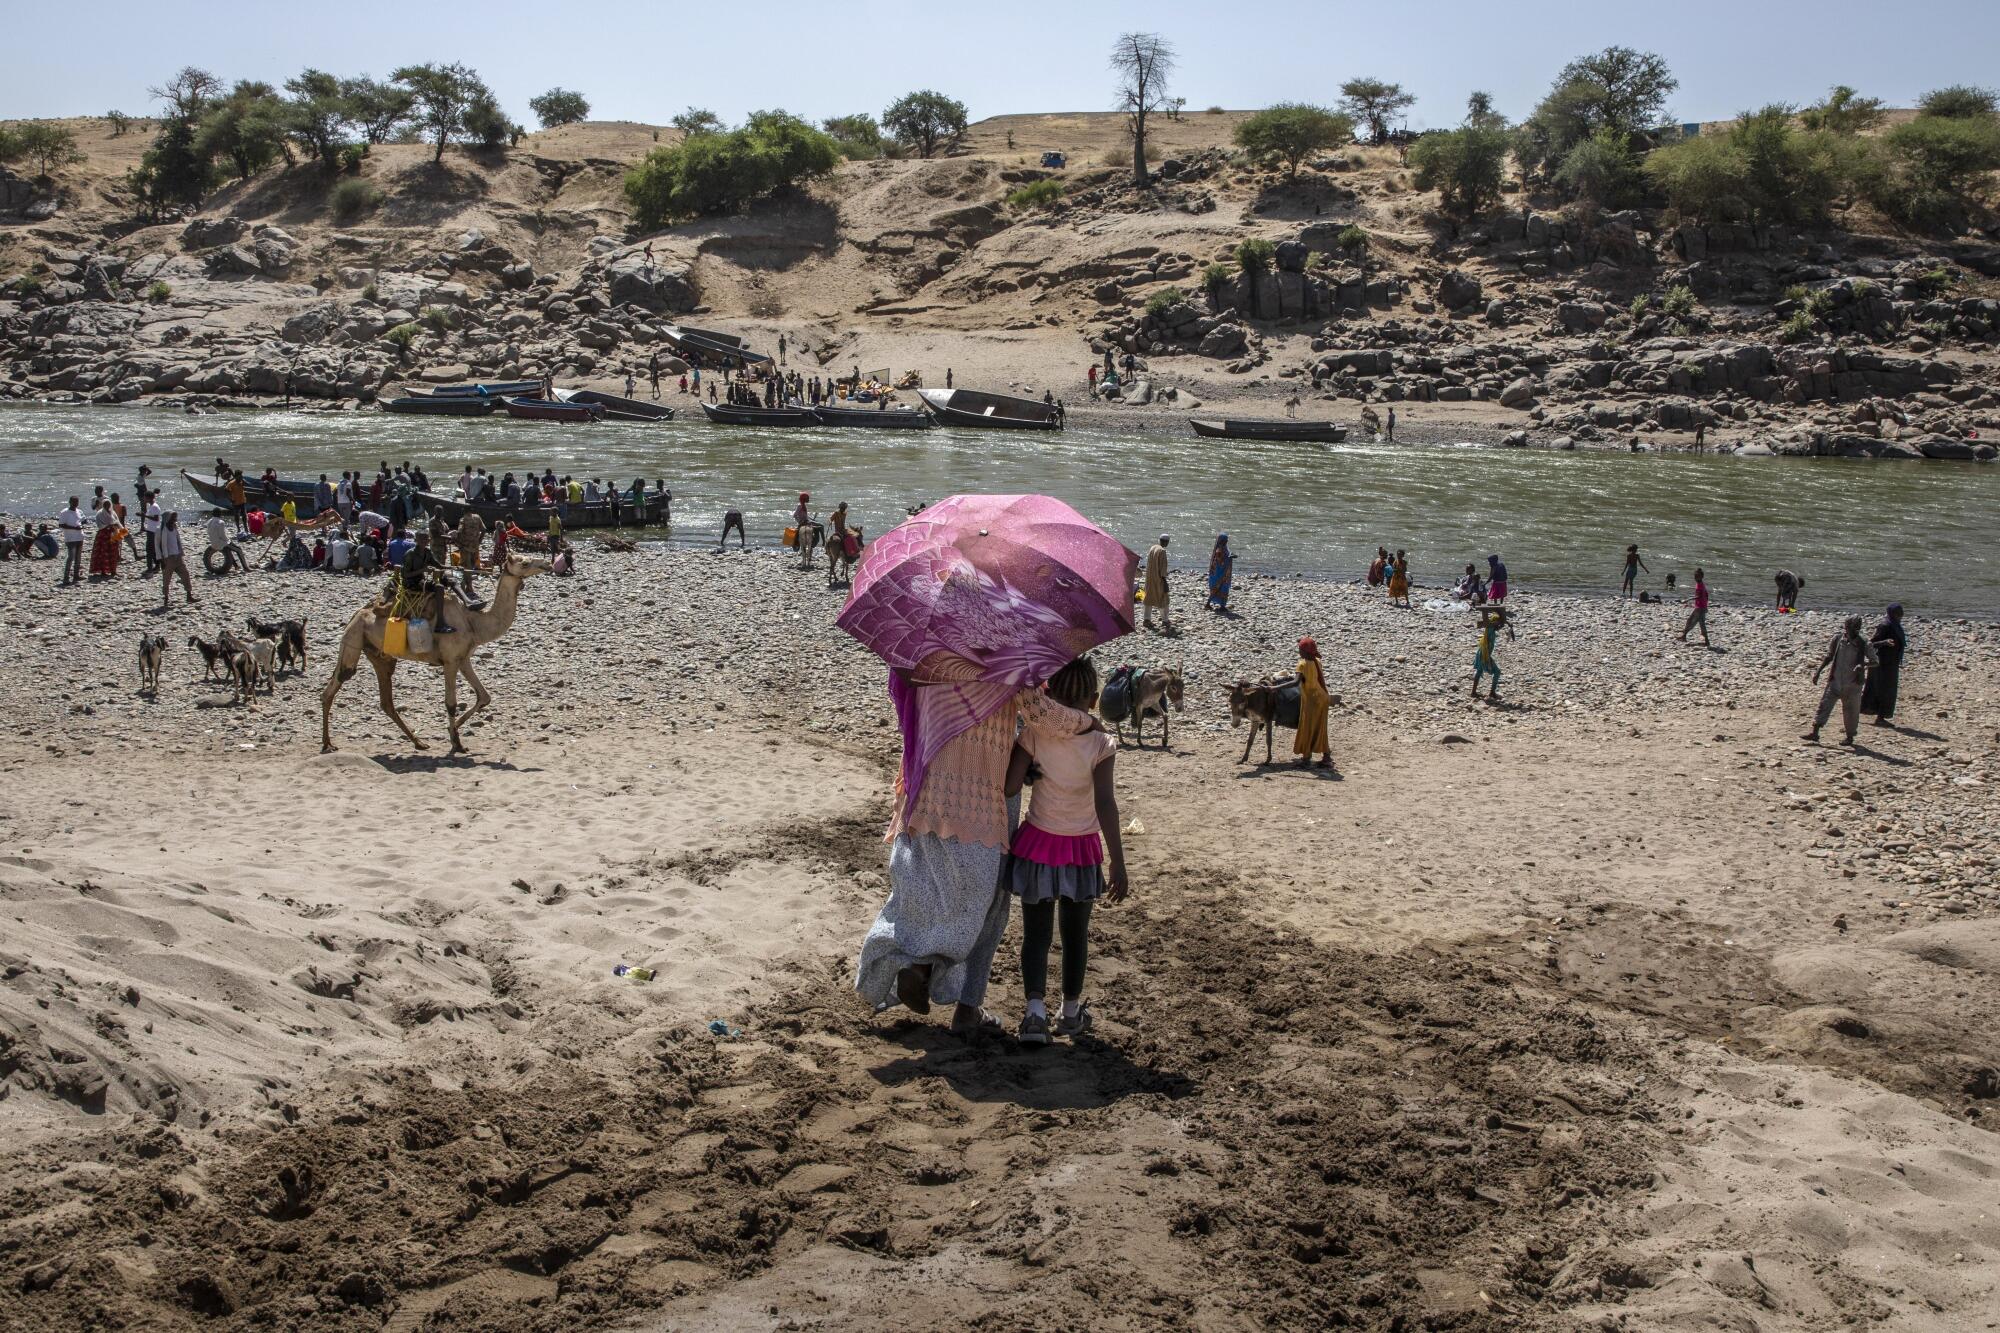 Refugees from Tigray arrive on the banks of the Tekeze River on the Sudan-Ethiopia border